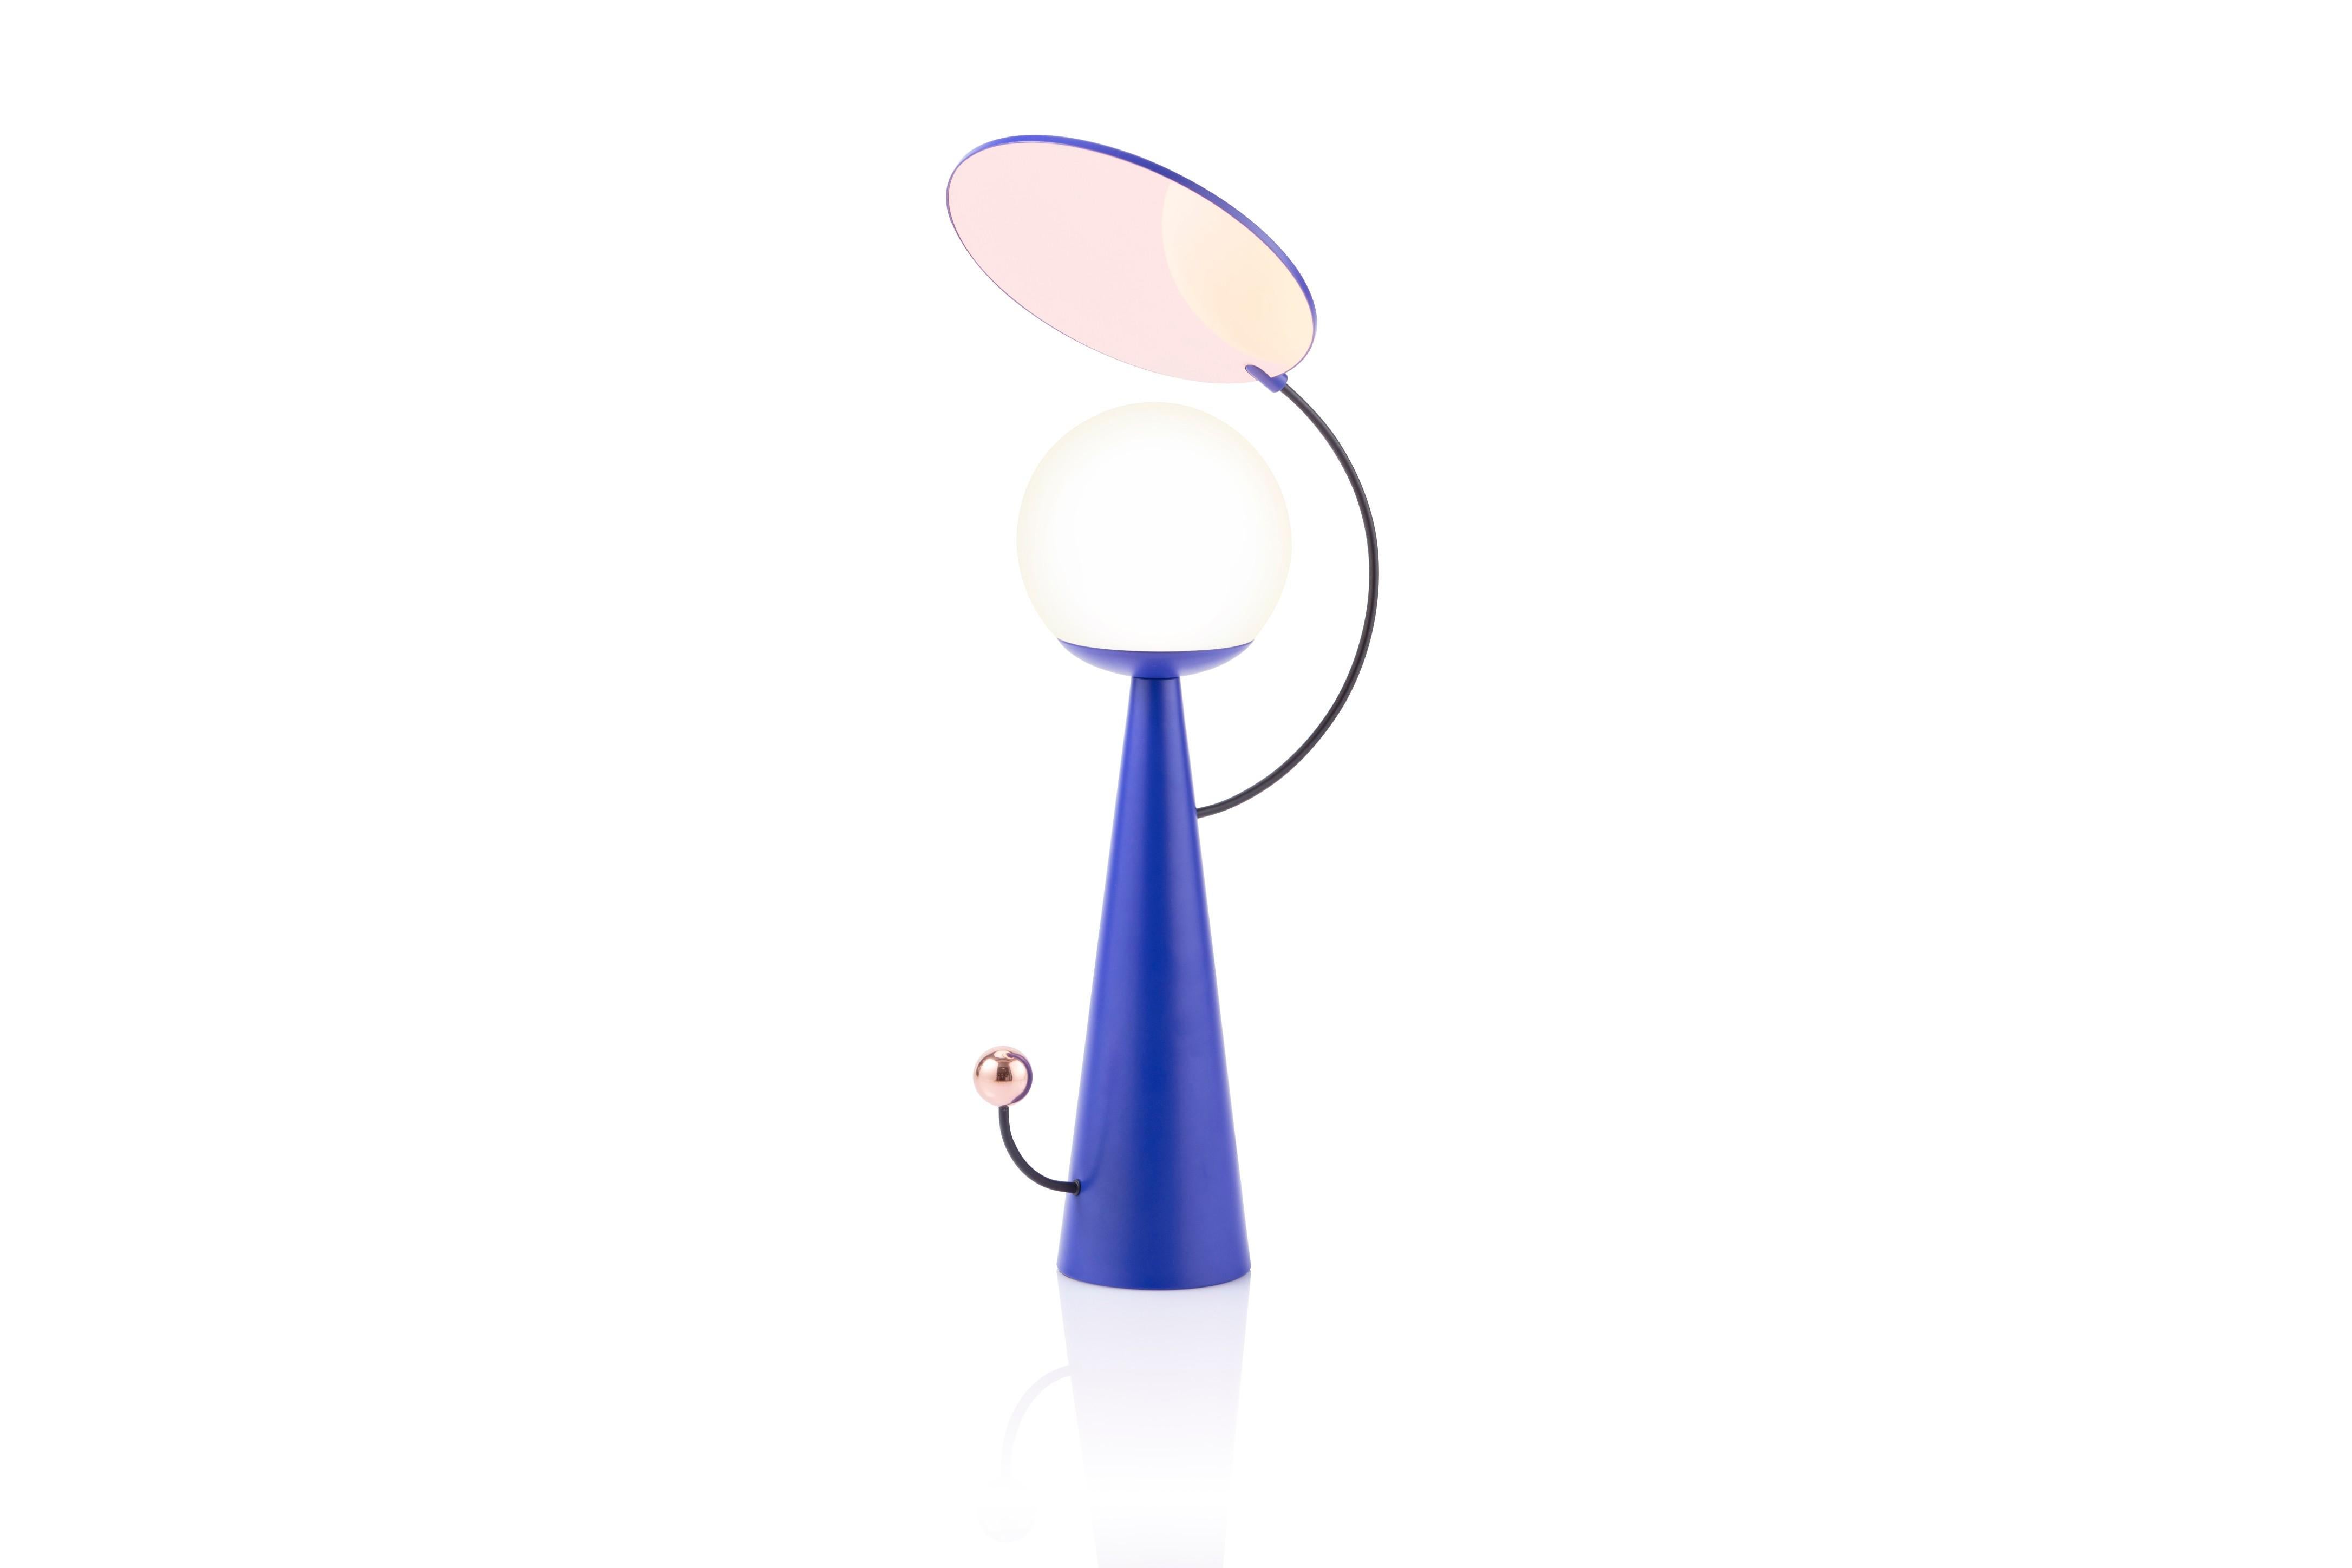 Blue lamp by Thomas Dariel, Maison Dada
Measures: Diameter 16 x height 65 cm
Base – Blue powder coated metal with matte finish
Rotating top – Blue powder coated metal / plated metal with glossy Copper finish
Touch switch in plated metal coated